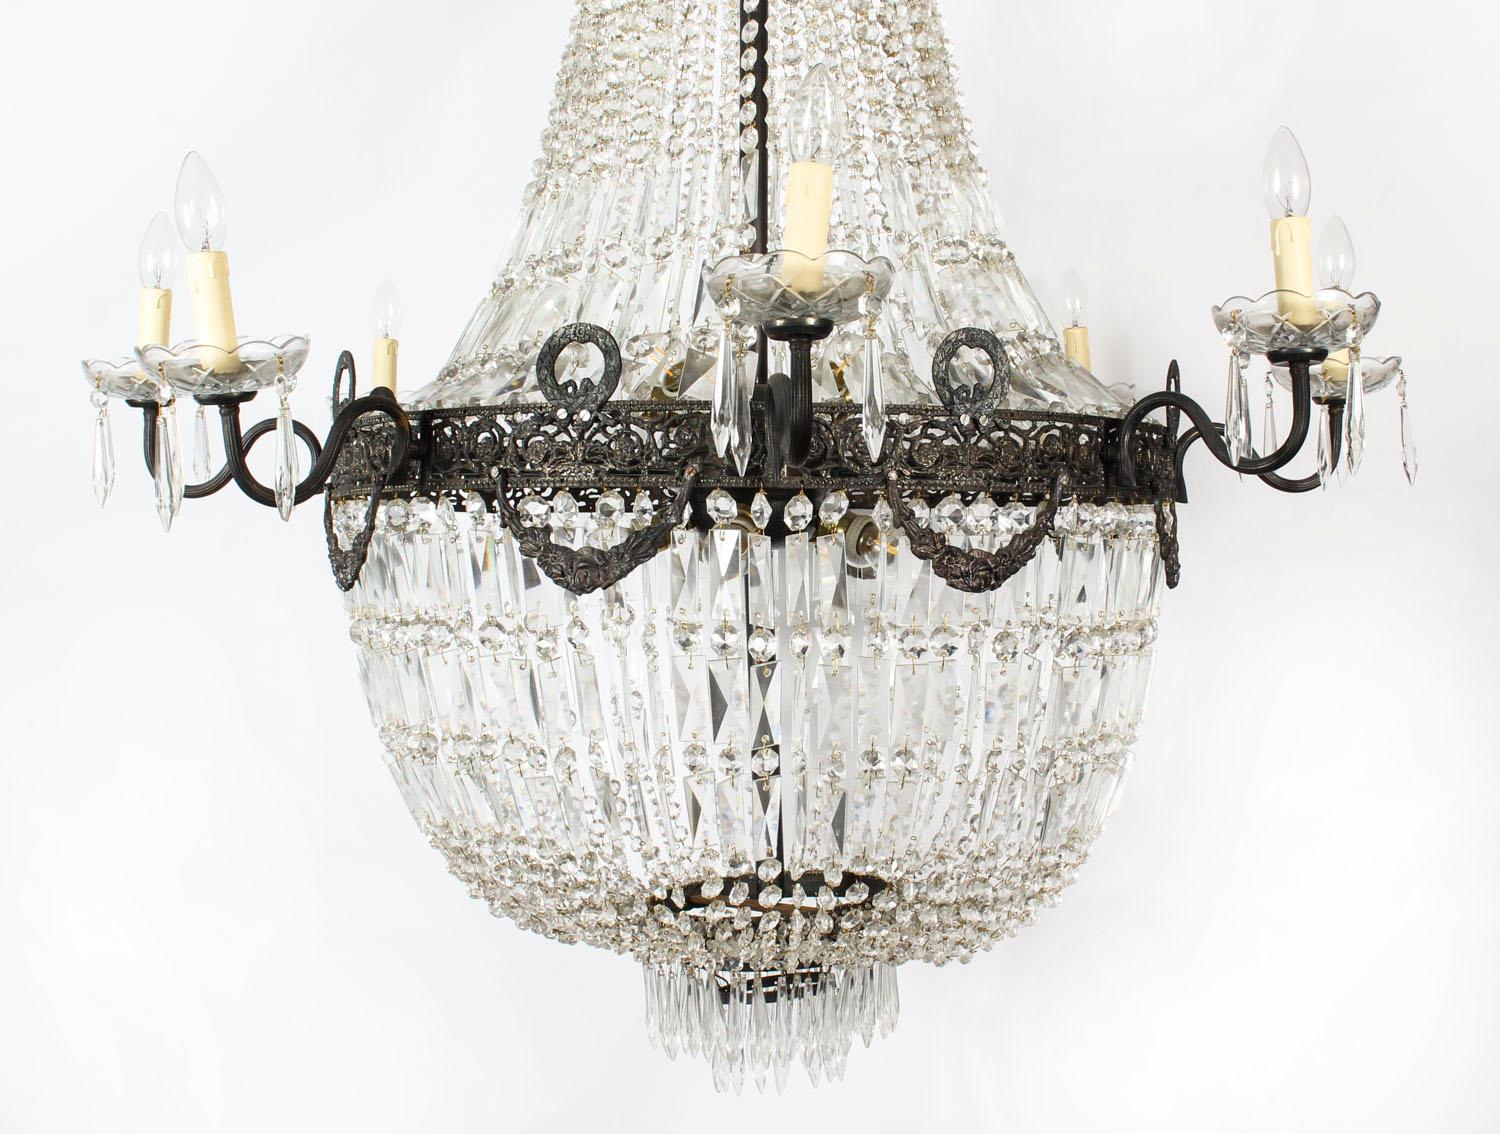 Antique Louis Revival 20 light Ballroom Cut Crystal Tent Chandelier c1920 In Good Condition For Sale In London, GB